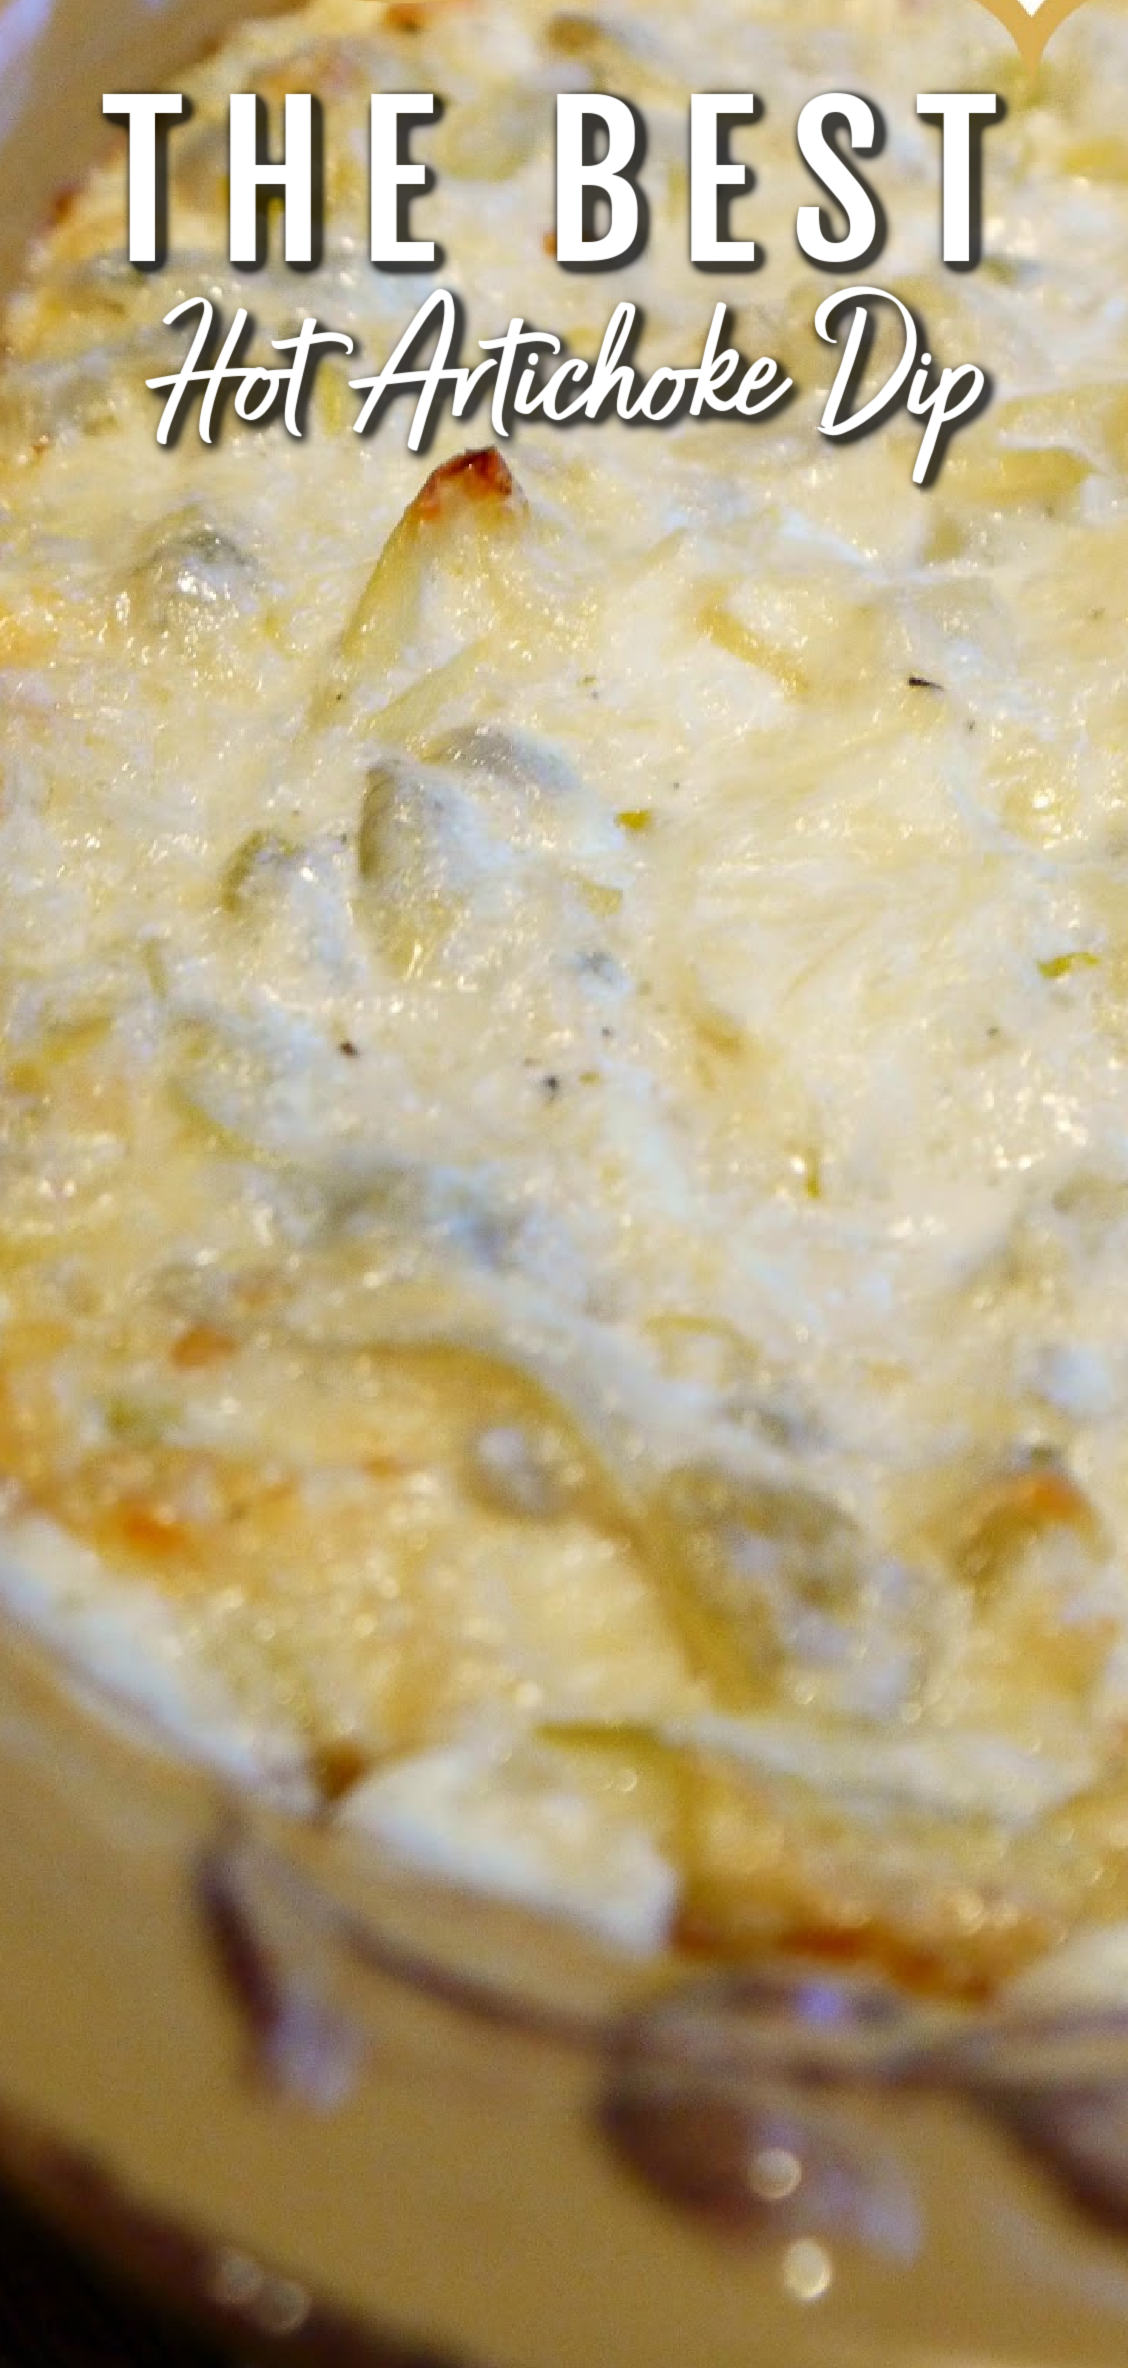 This image shows a close up of hot artichoke dip in a baking dish. 